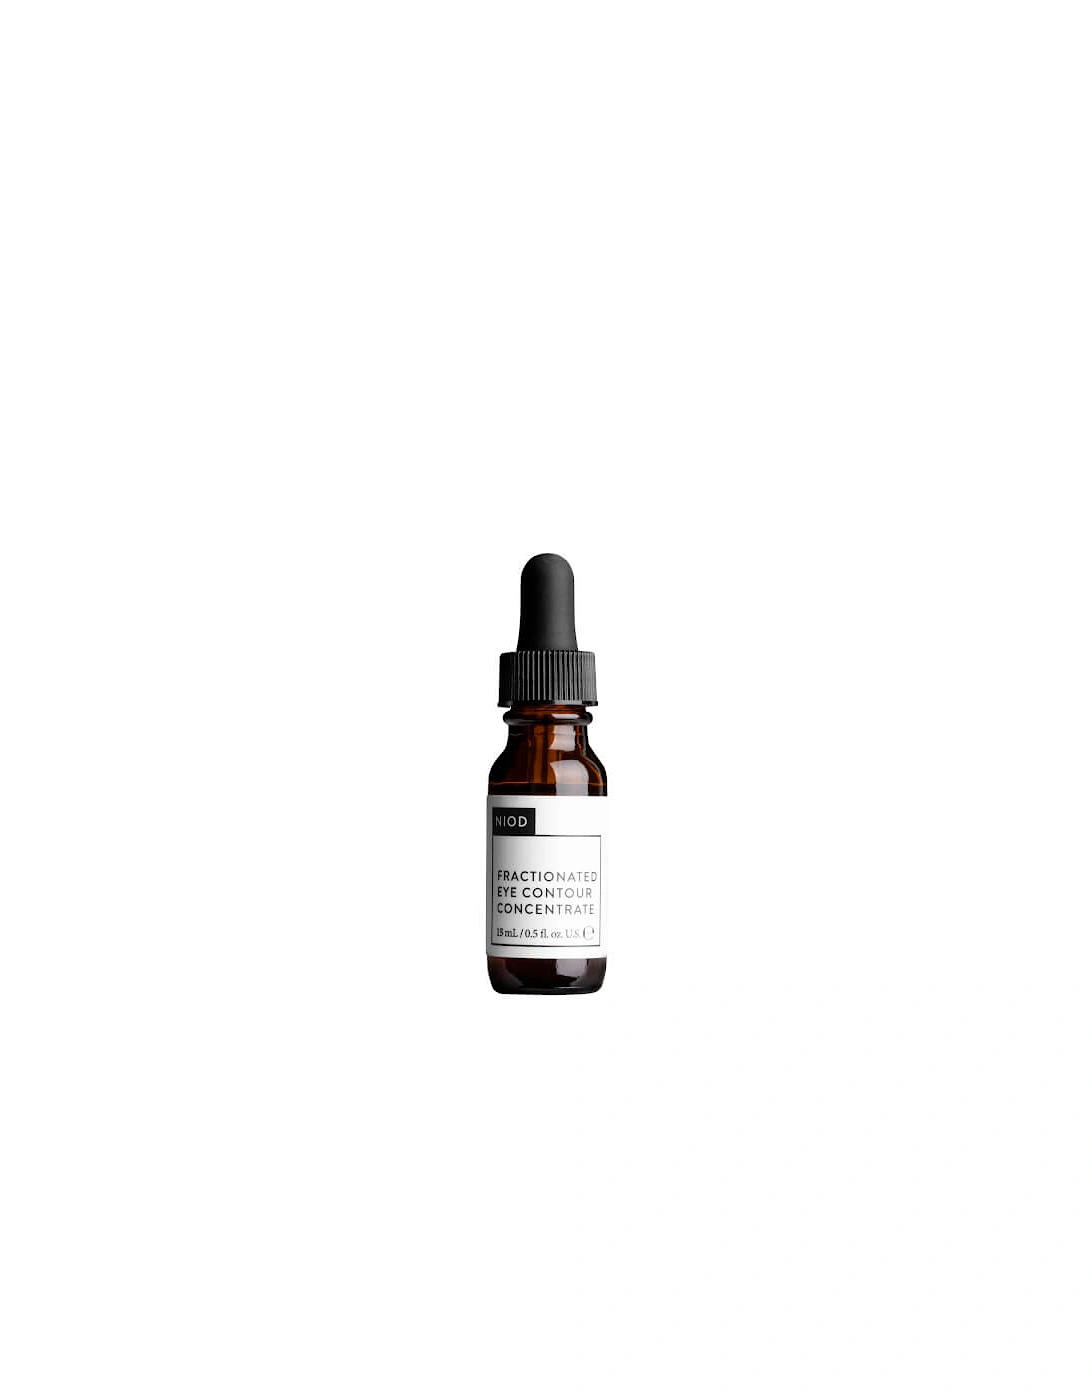 Fractionated Eye Contour Concentrate Serum 15ml - - Fractionated Eye-Contour Concentrate Serum (15ml) - Onlineshopper69 - Fractionated Eye-Contour Concentrate Serum (15ml) - em, 2 of 1